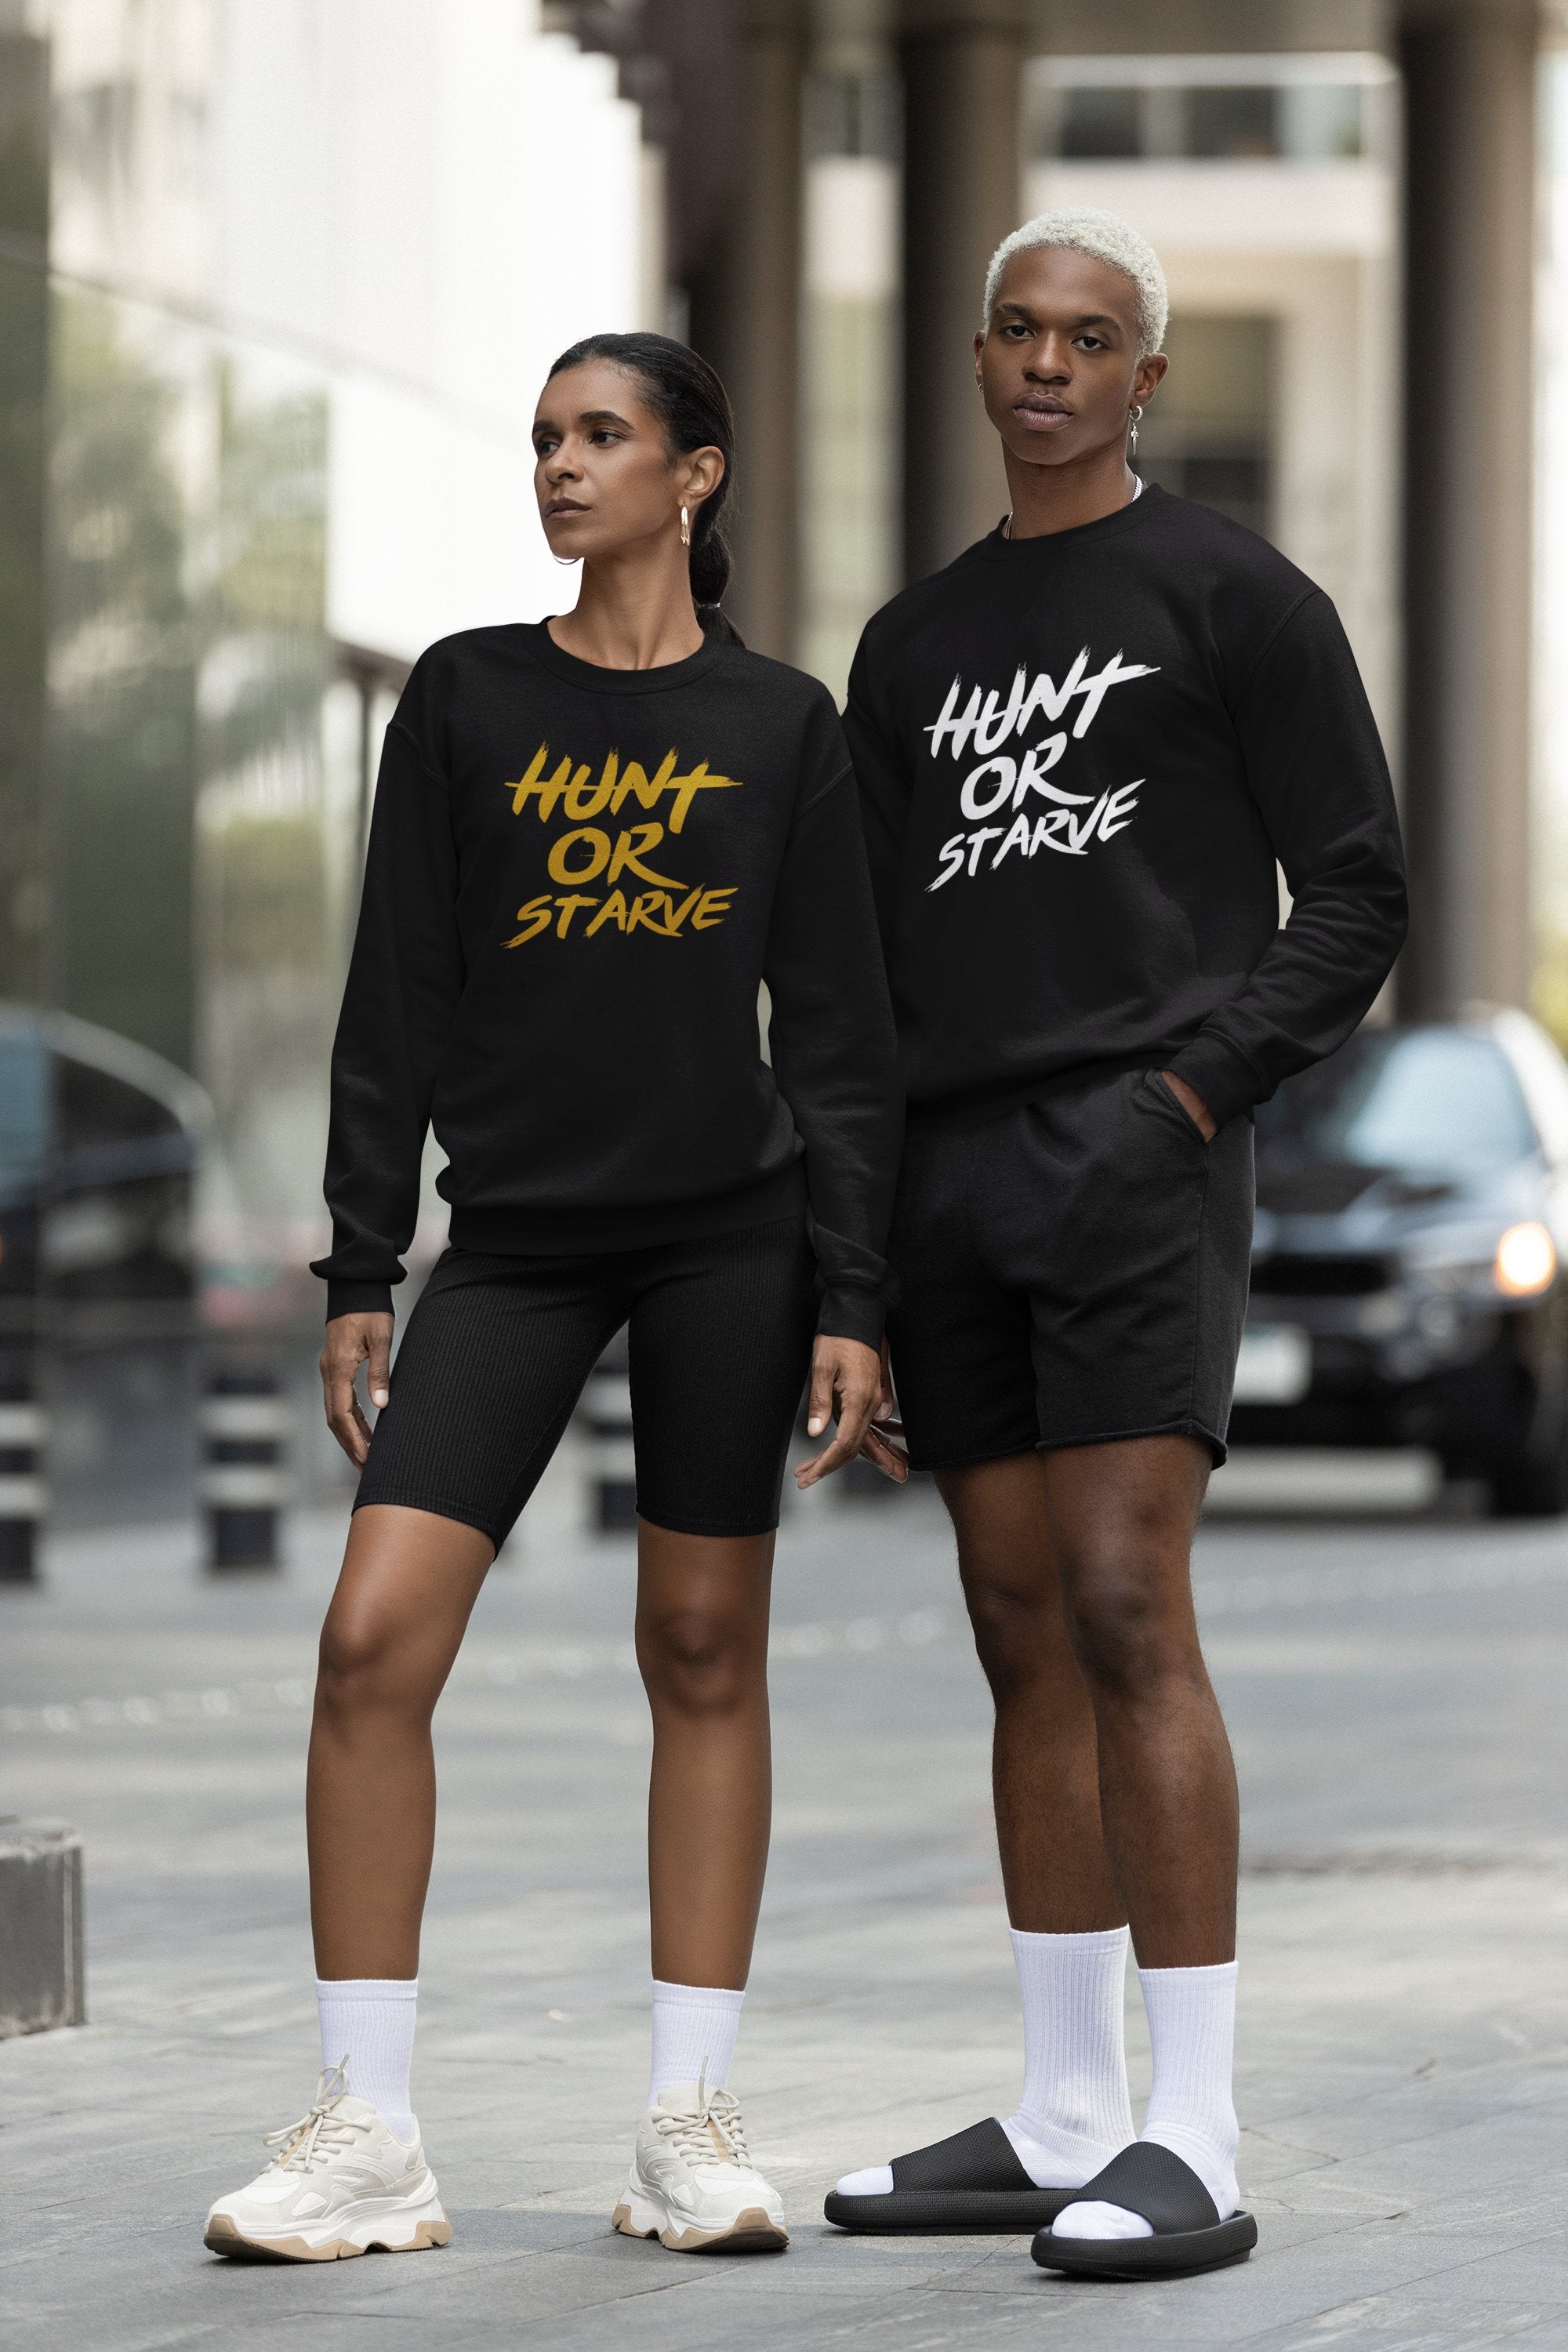 Image: A male and a female model stand side by side, both wearing black crewneck sweatshirts with 'Hunt or Starve' in white lettering. Their confident poses emphasize the empowering message of the apparel